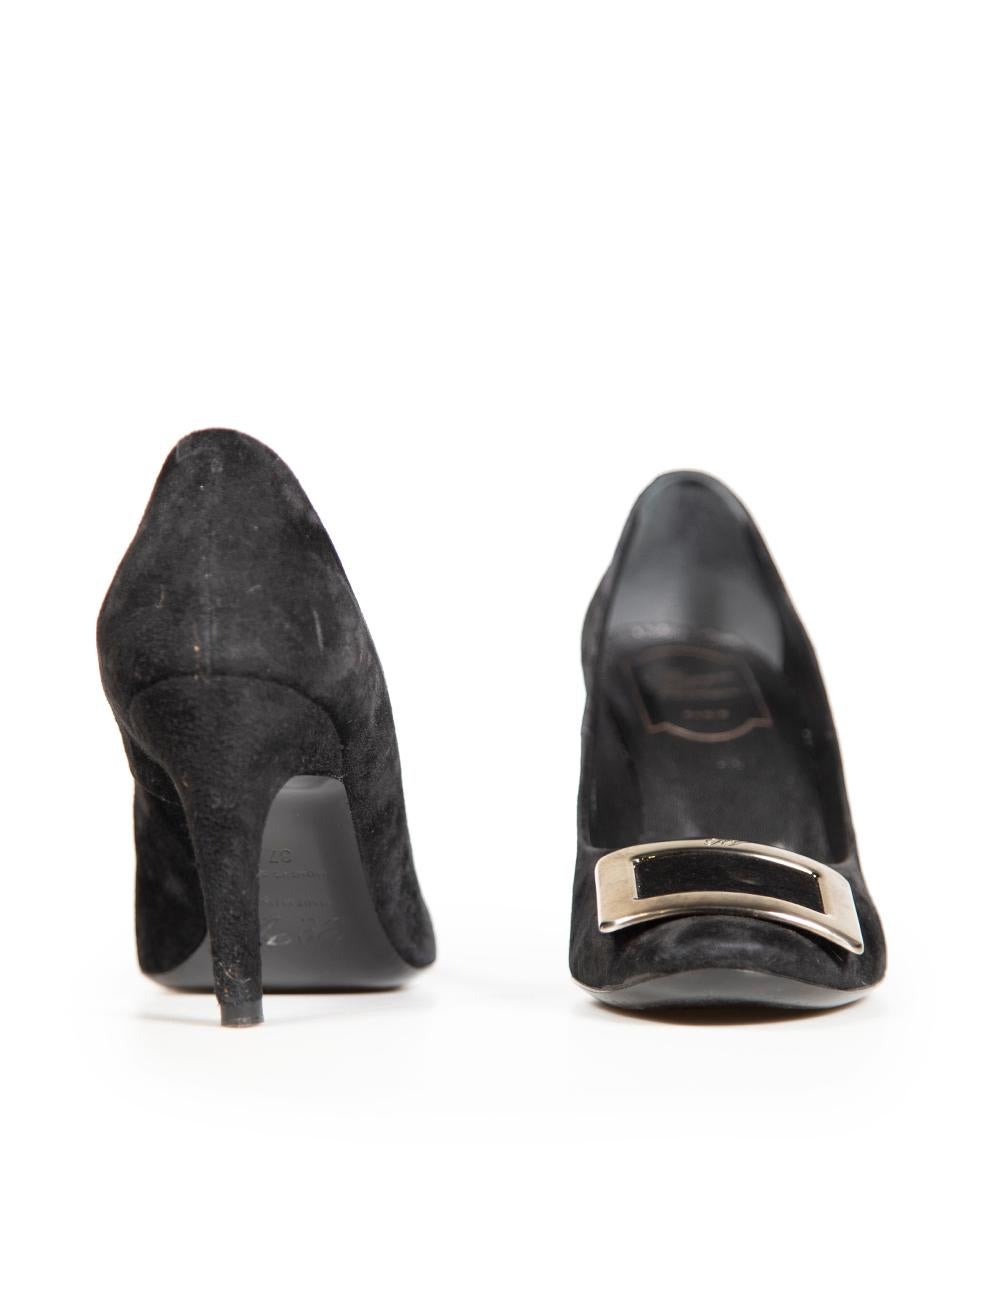 Roger Vivier Black Suede Belle Buckle Pumps Size IT 37 In Good Condition For Sale In London, GB